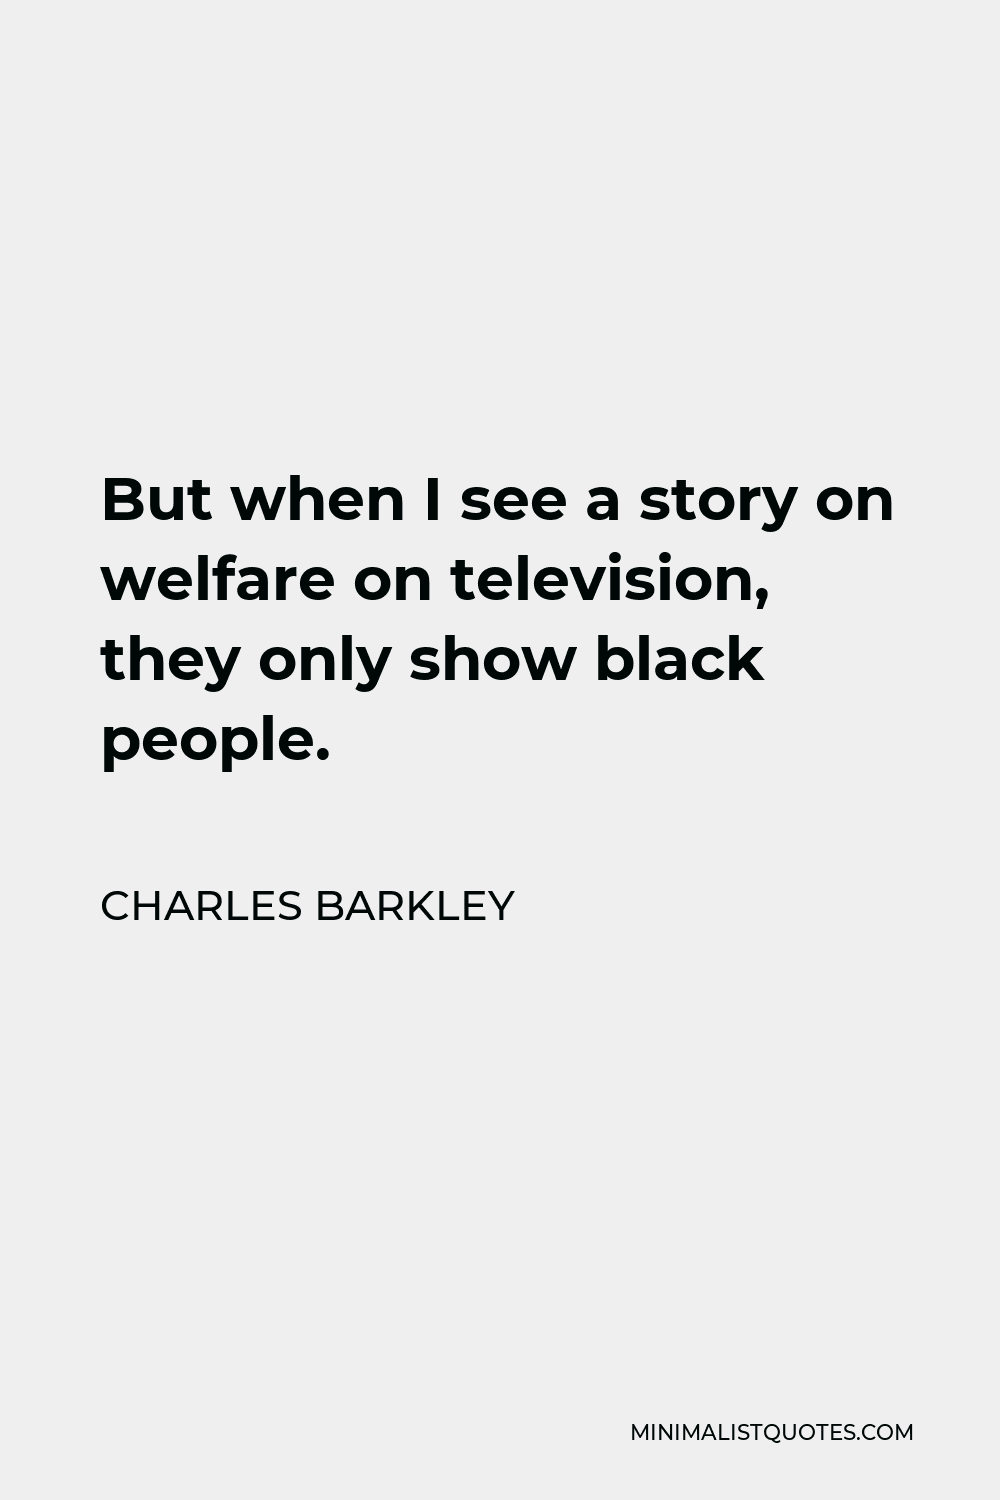 Charles Barkley Quote - But when I see a story on welfare on television, they only show black people.